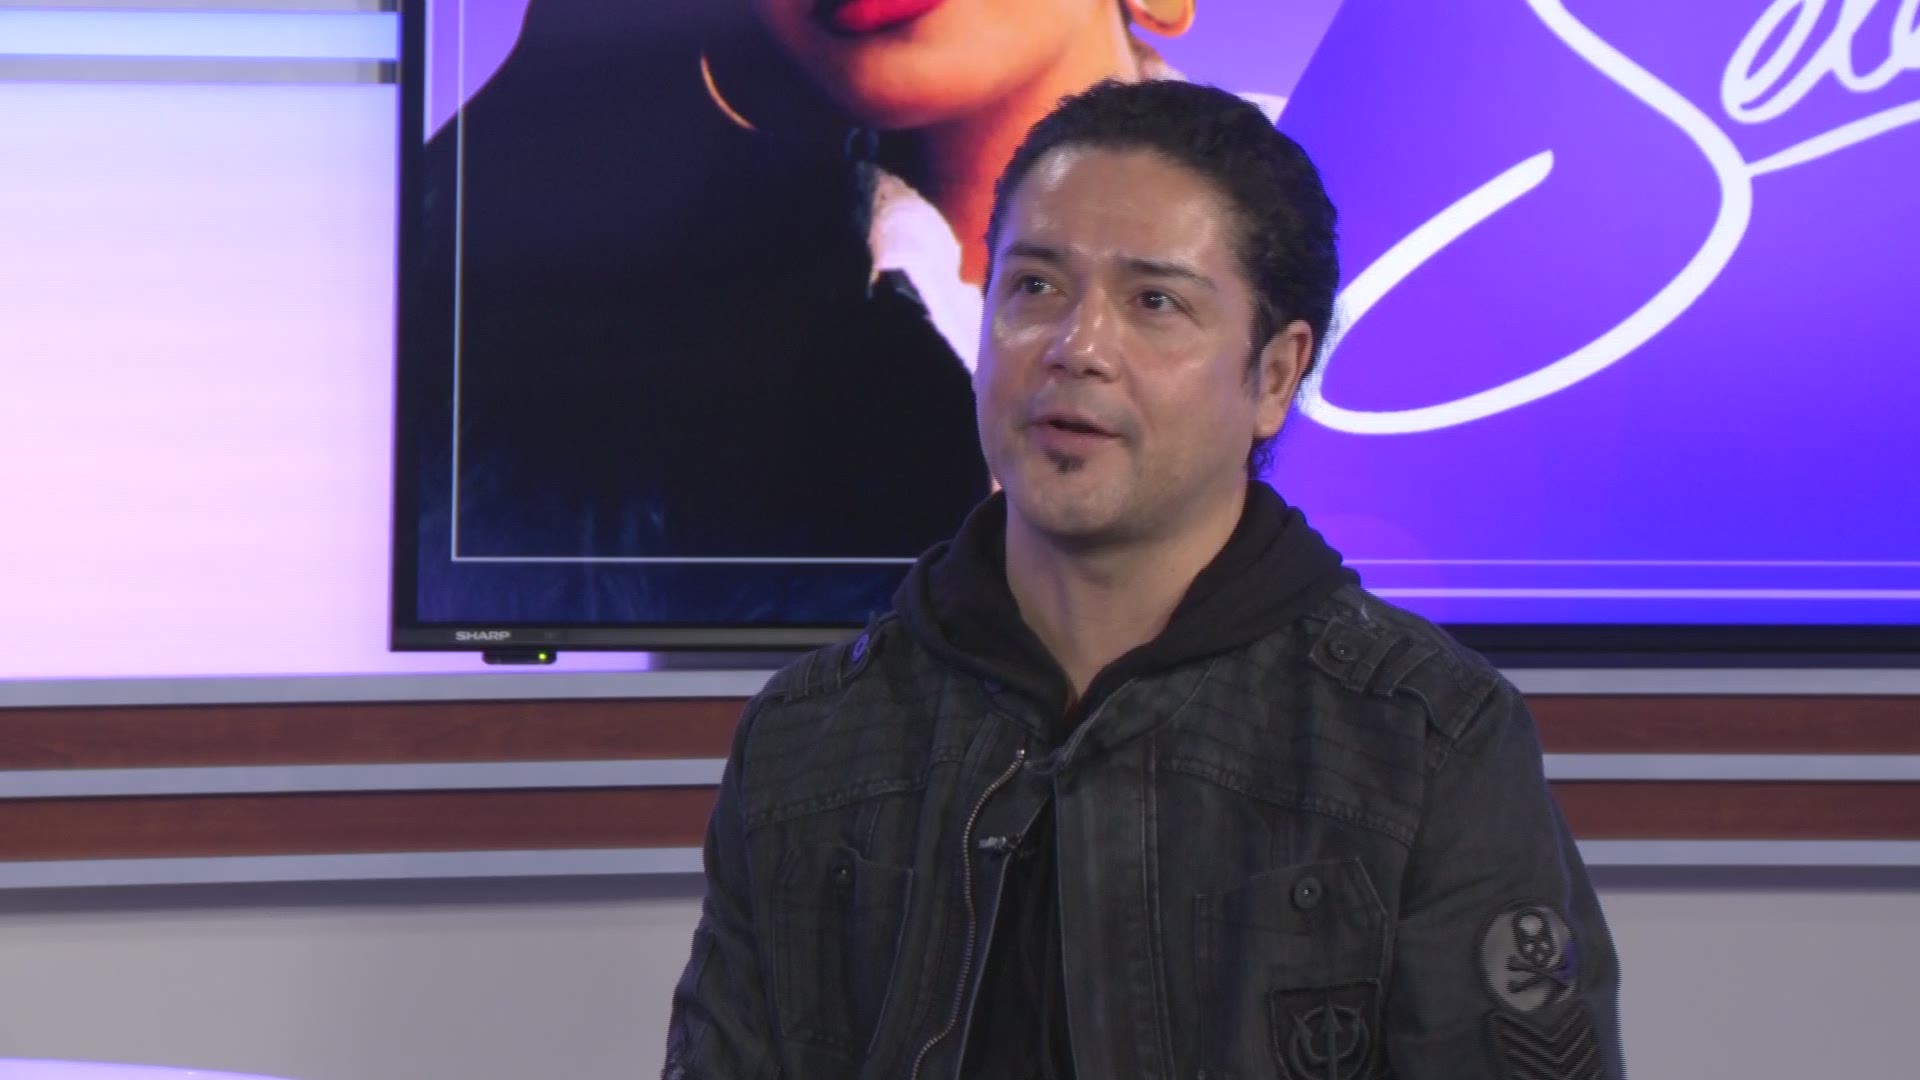 Chris Perez, the husband of the late Selena Quintanilla, joins KENS 5 in studio for an extended interview about the Tejano legend's legacy.